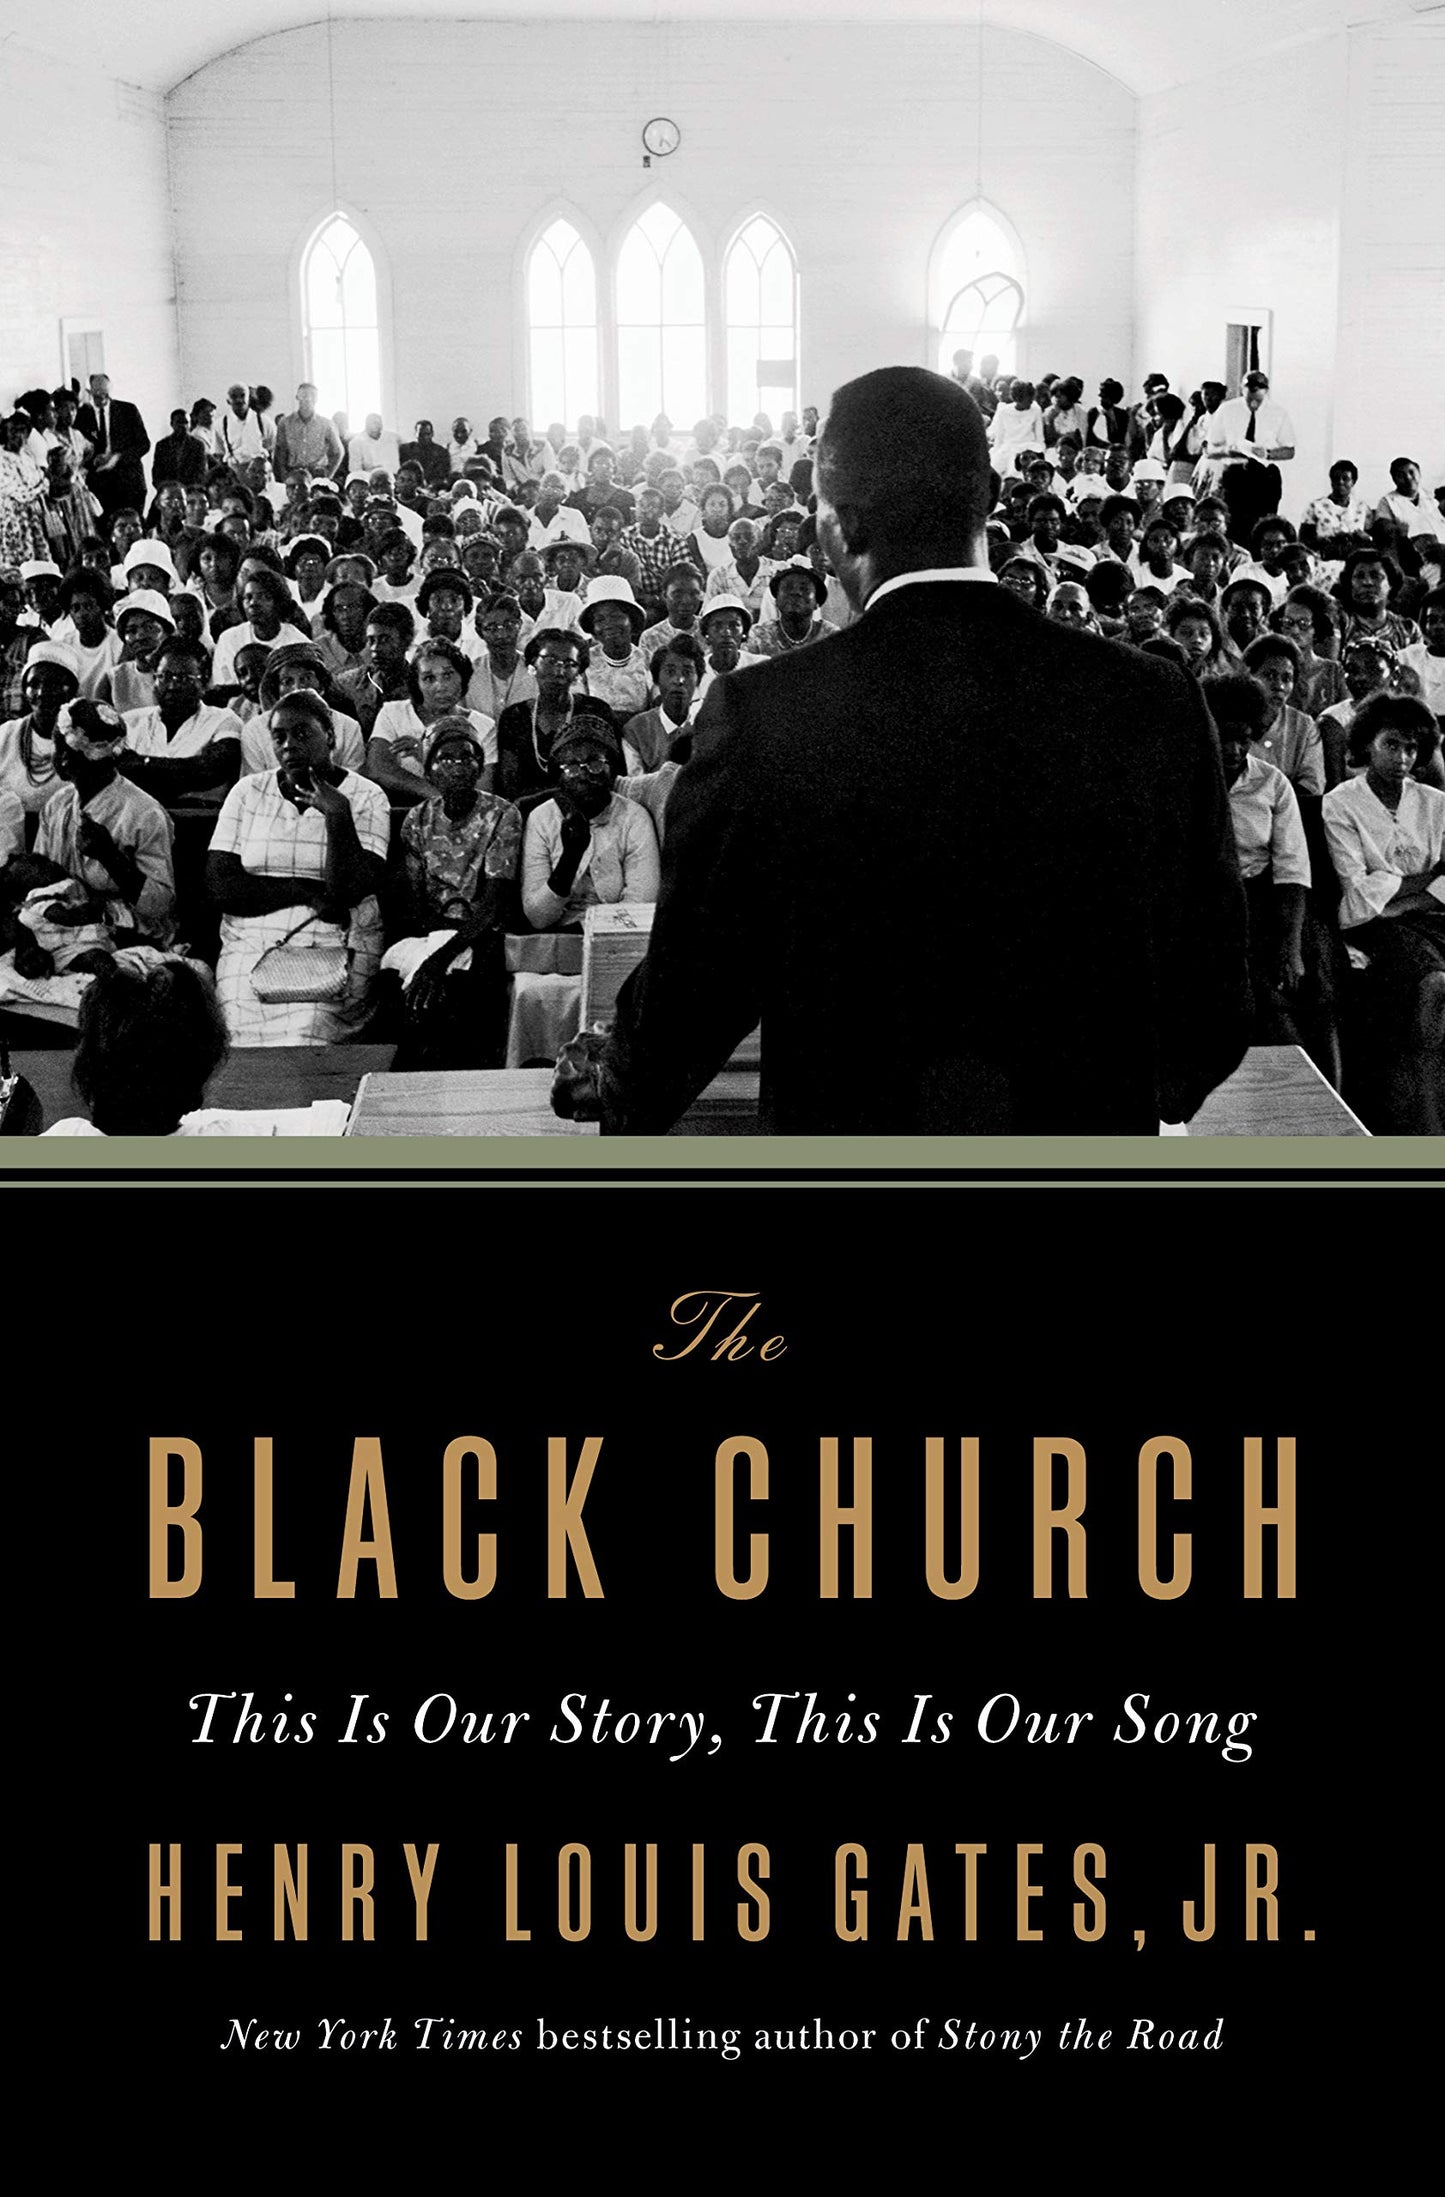 The Black Church // This Is Our Story, This Is Our Song